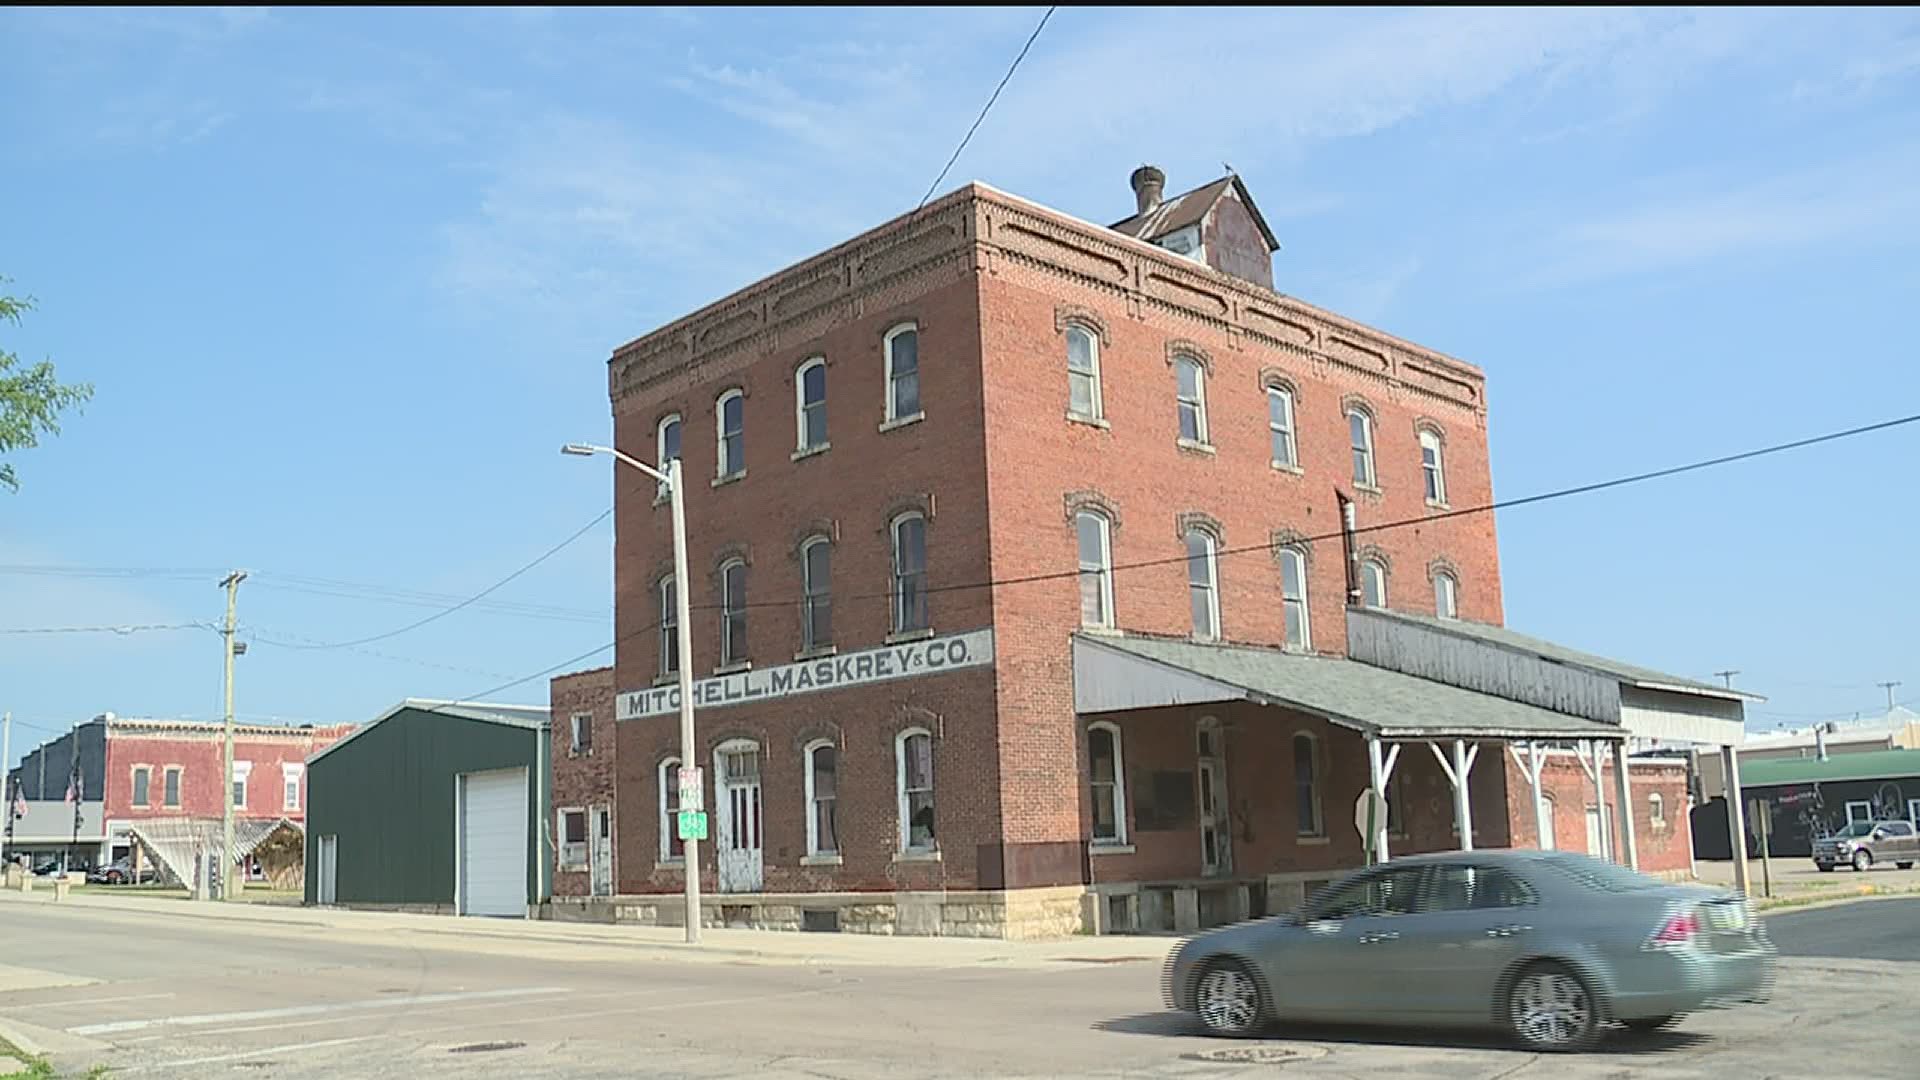 The Mitchell-Maskrey Mill was built in the 1850s, and it was still used up until a few years ago. Now, a developer wants to give it a new purpose.